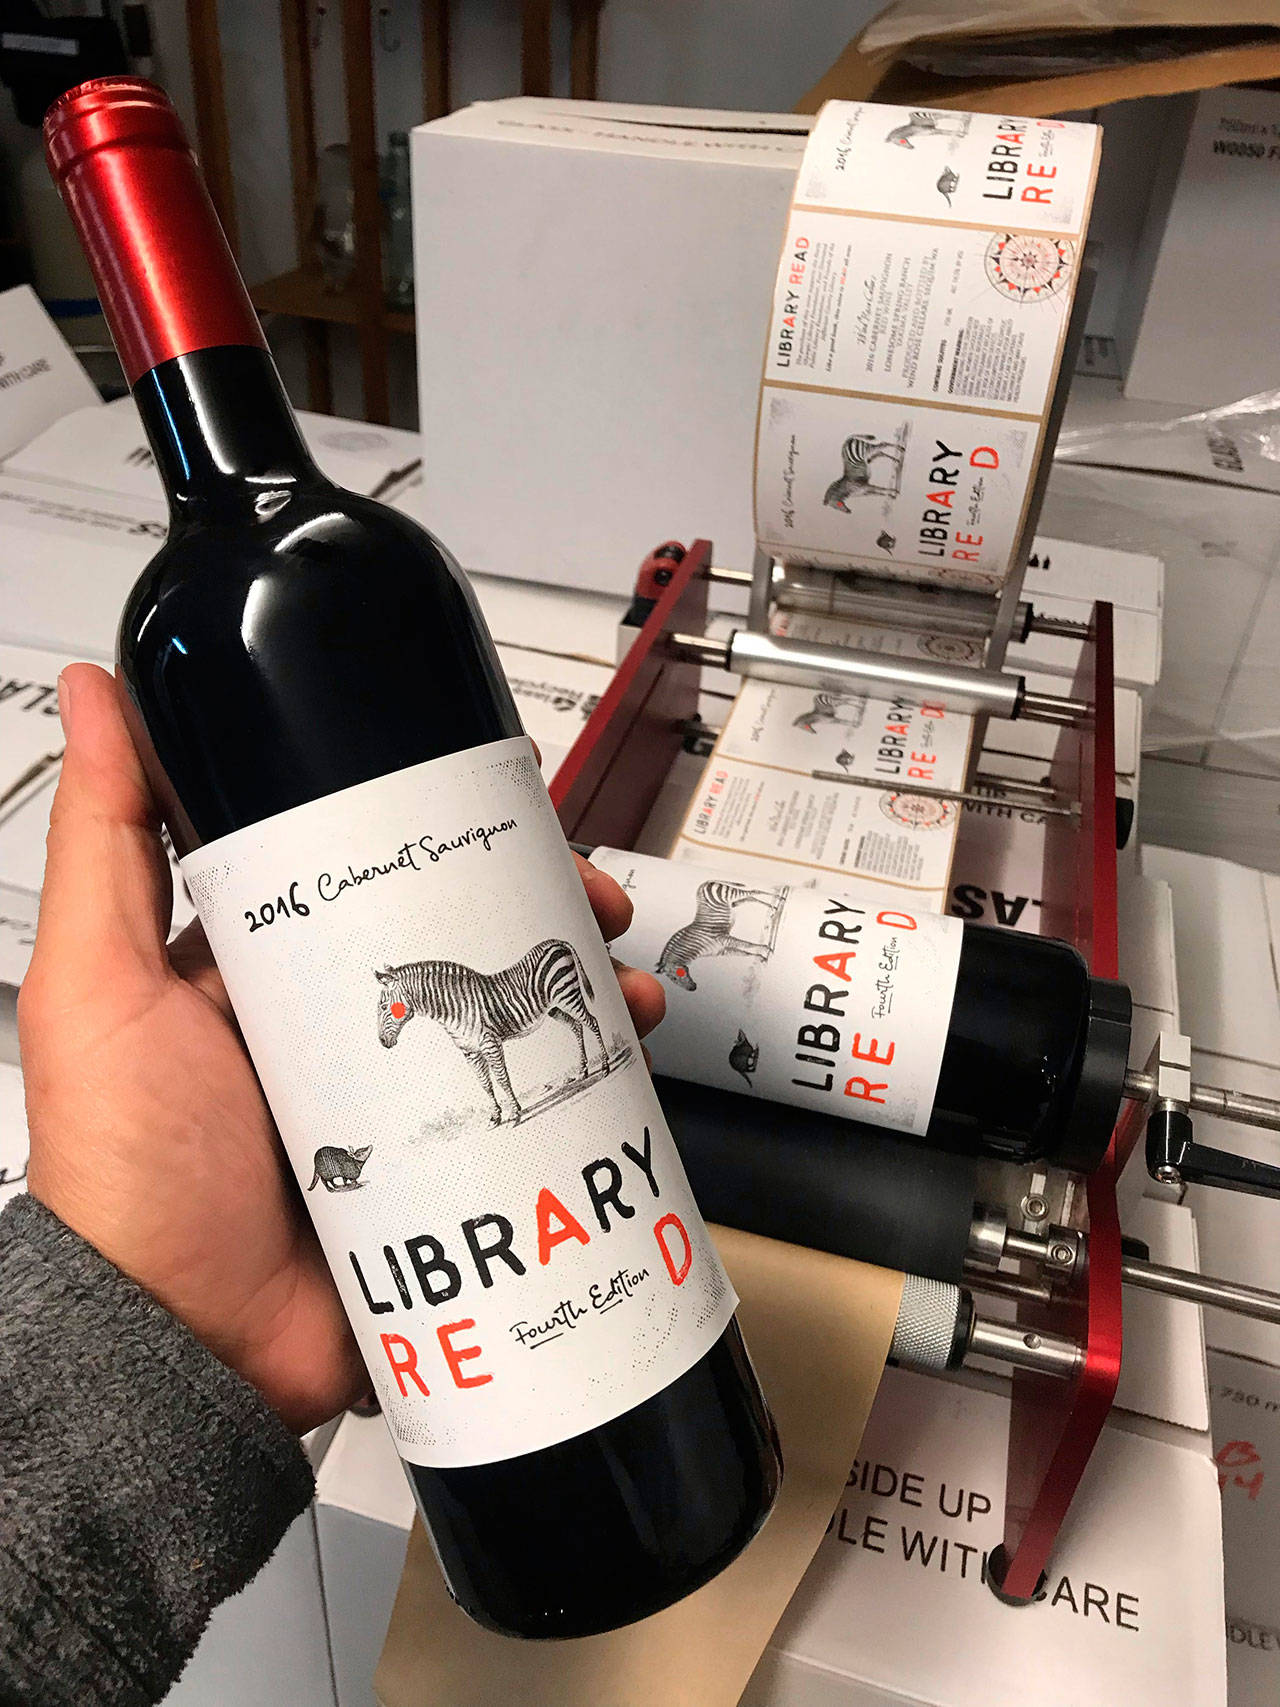 The newest edition of the Library REaD wine supports libraries in Clallam and Jefferson counties.